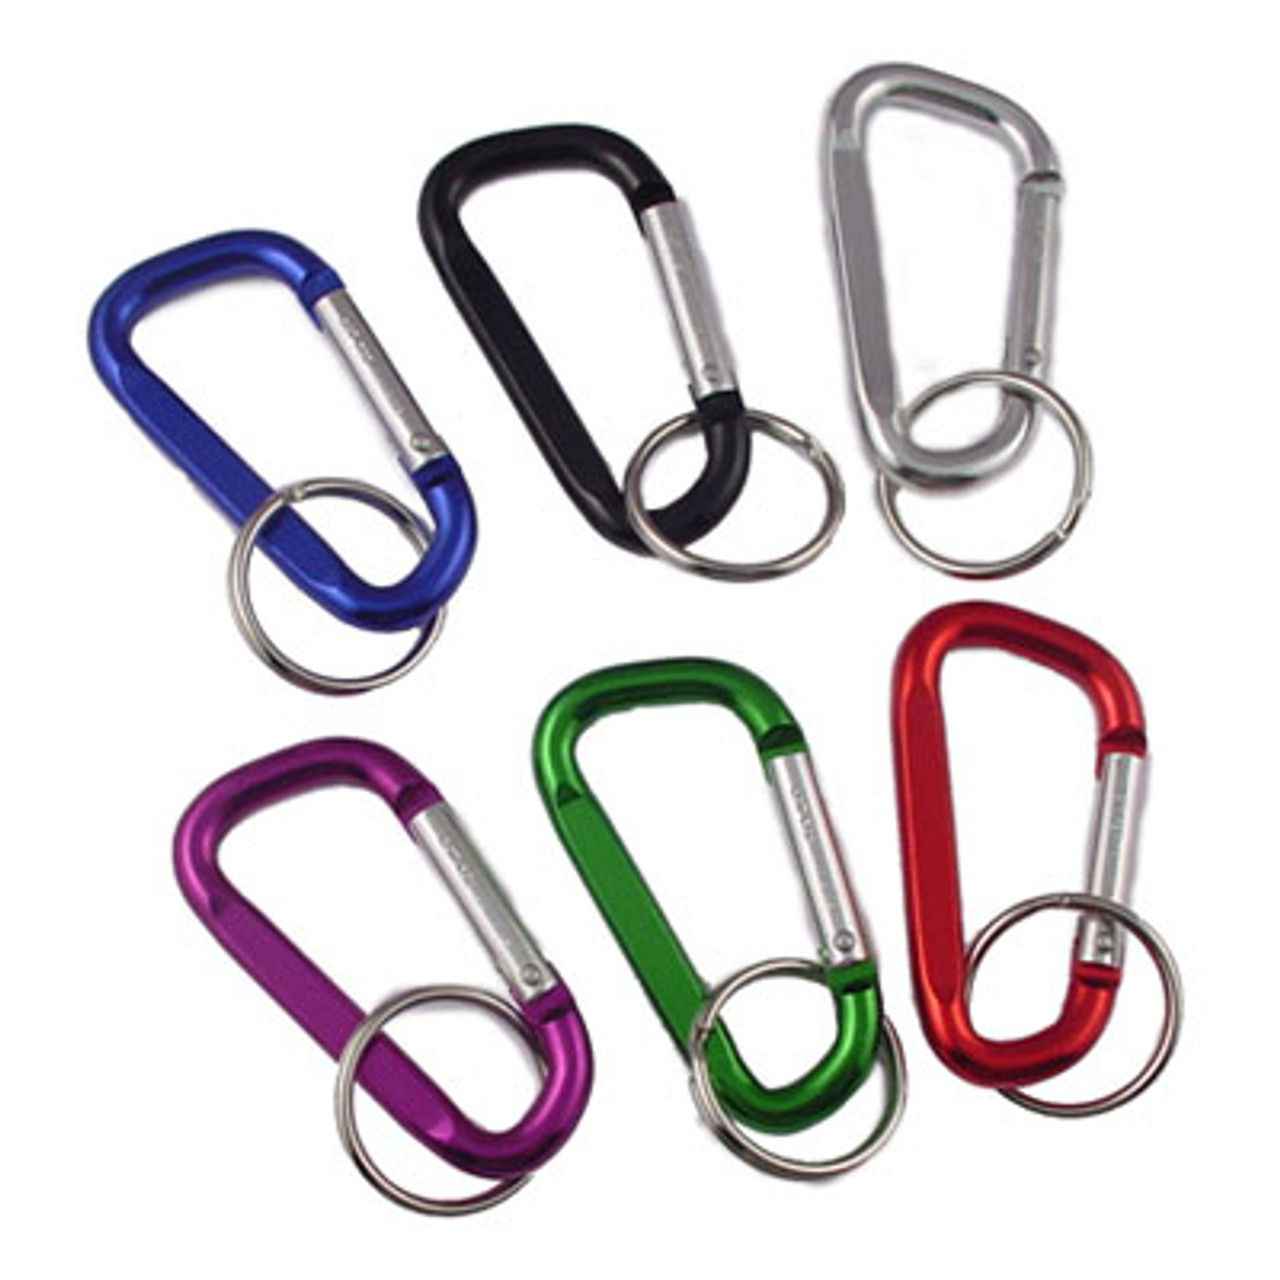 Shop for and Buy Small Carabiner Keychain at . Large